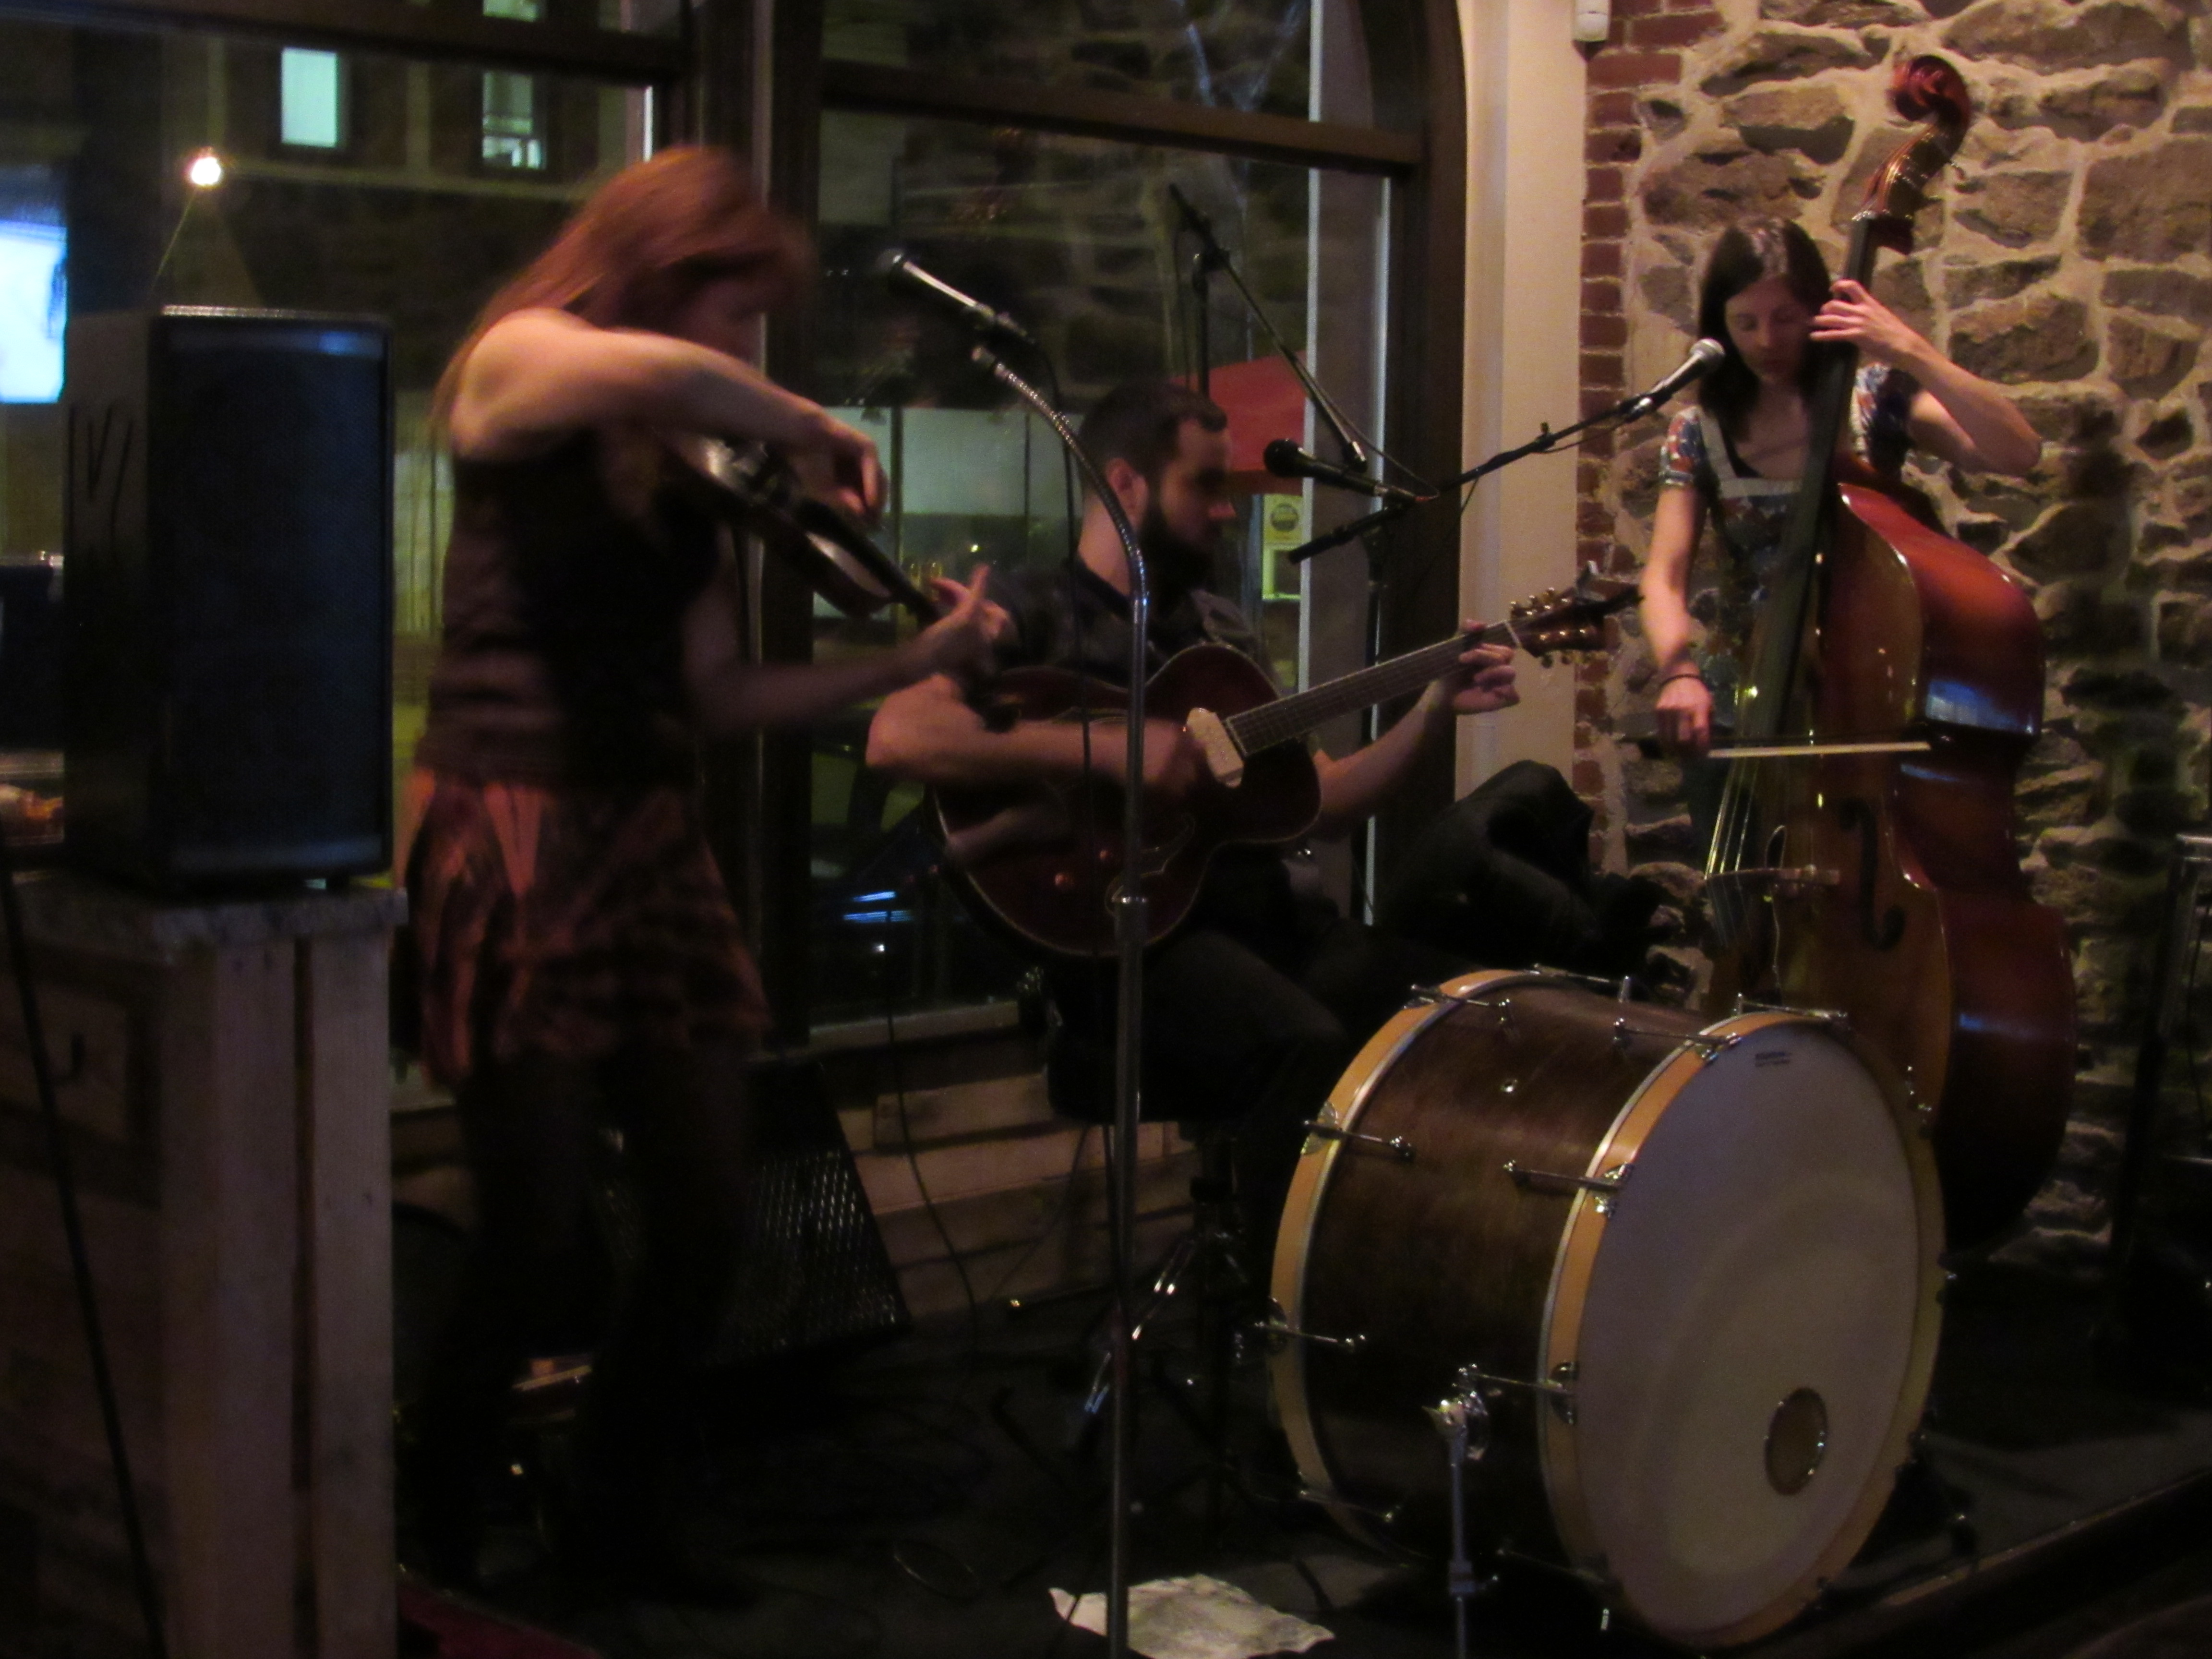  Lavacave Band at Funk's Brewery Elizabethtown, Pa